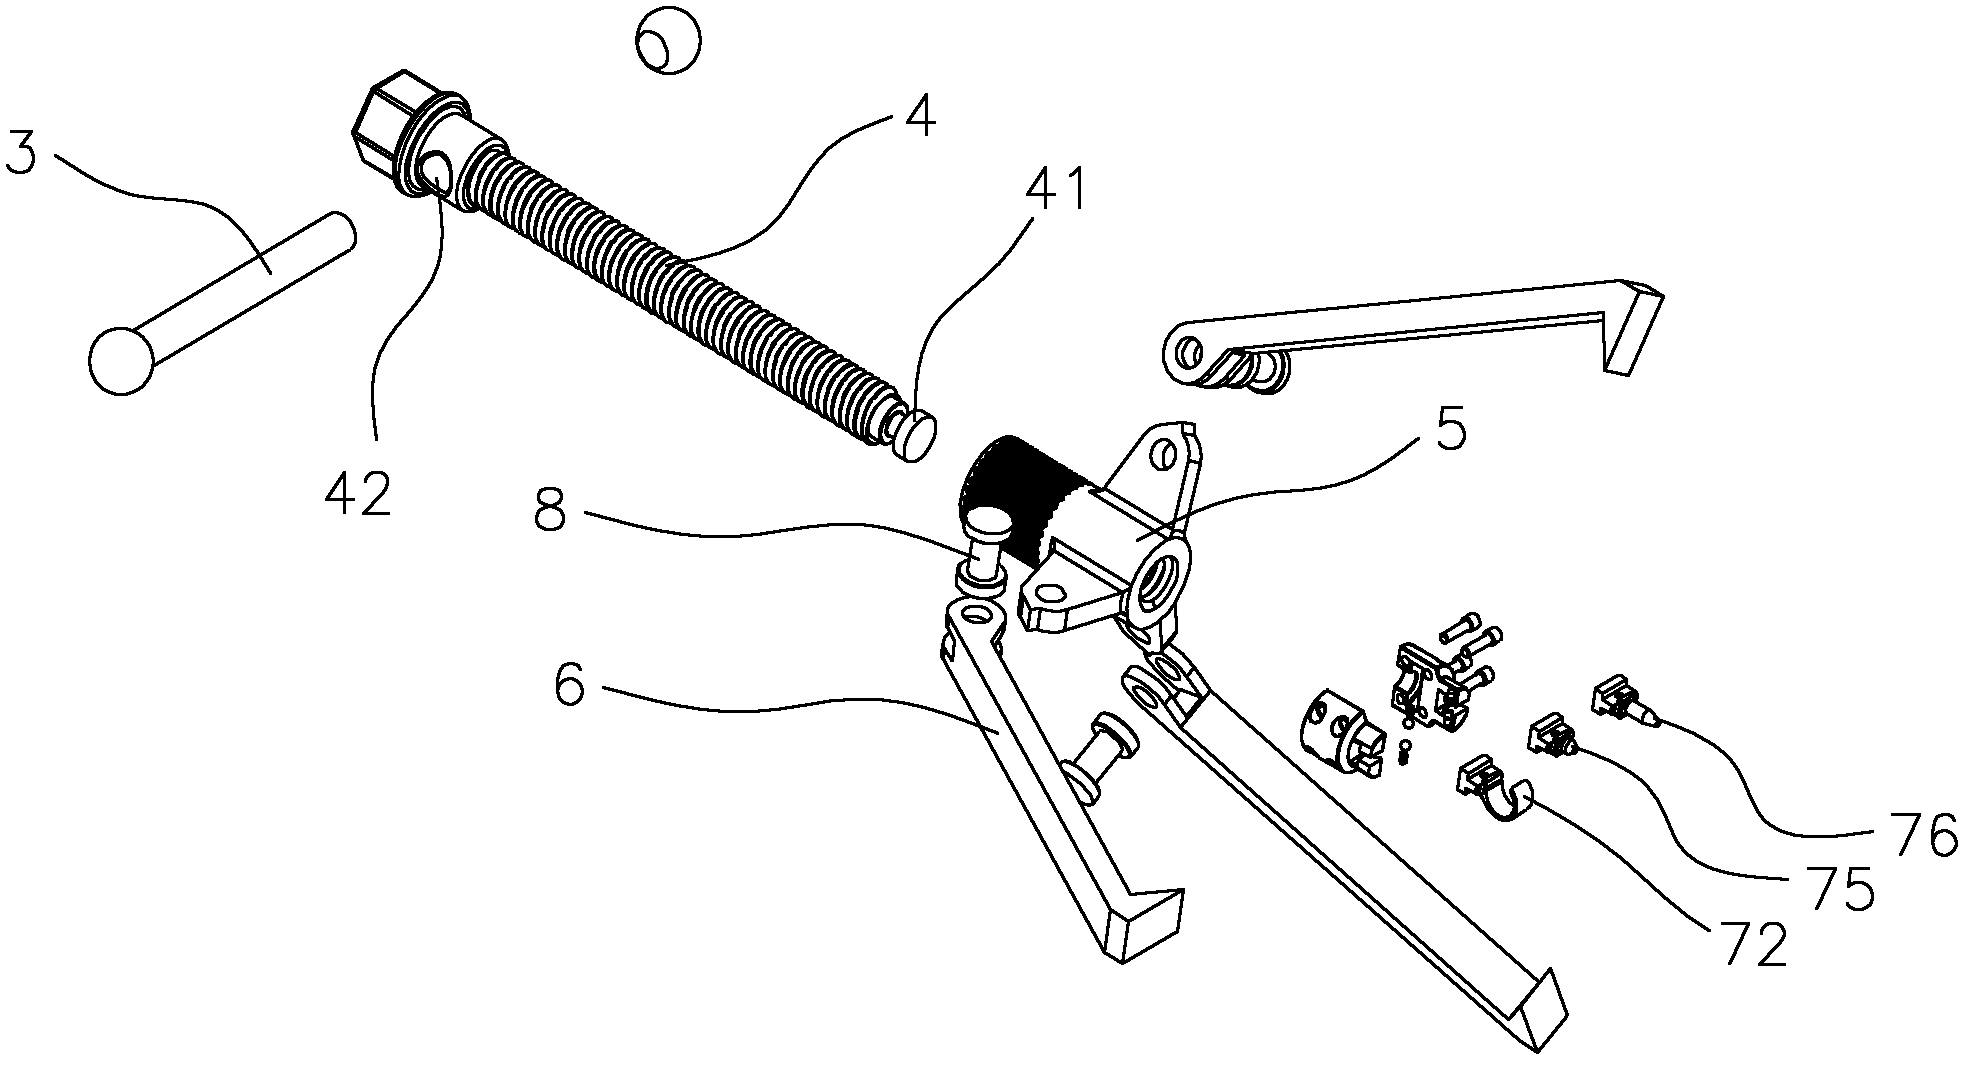 Push-and-pull device for assembling and disassembling lamp